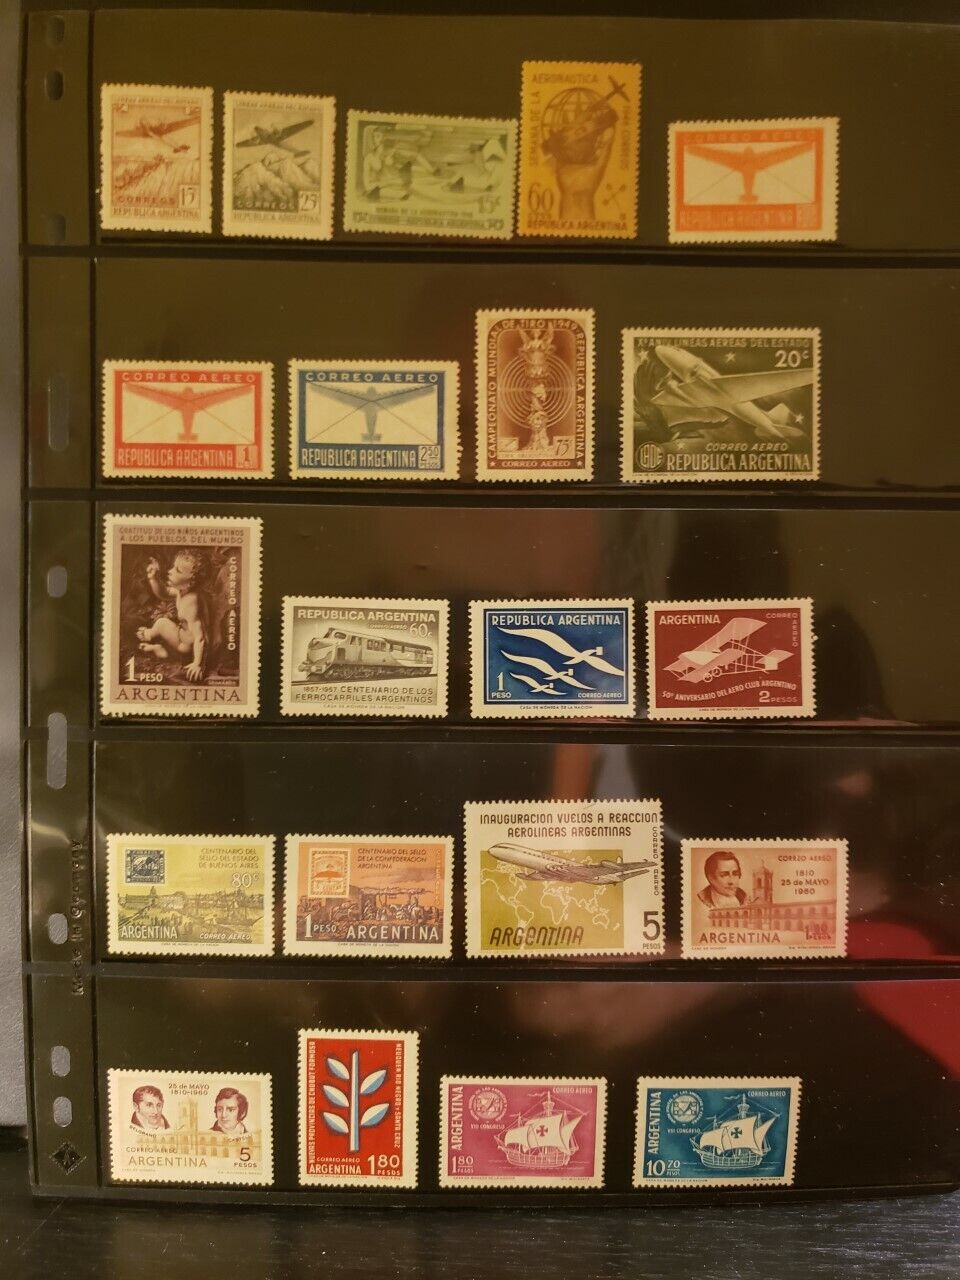 Argentina Airmail Stamps Lot of 48 - MNH - see details for list Без бренда